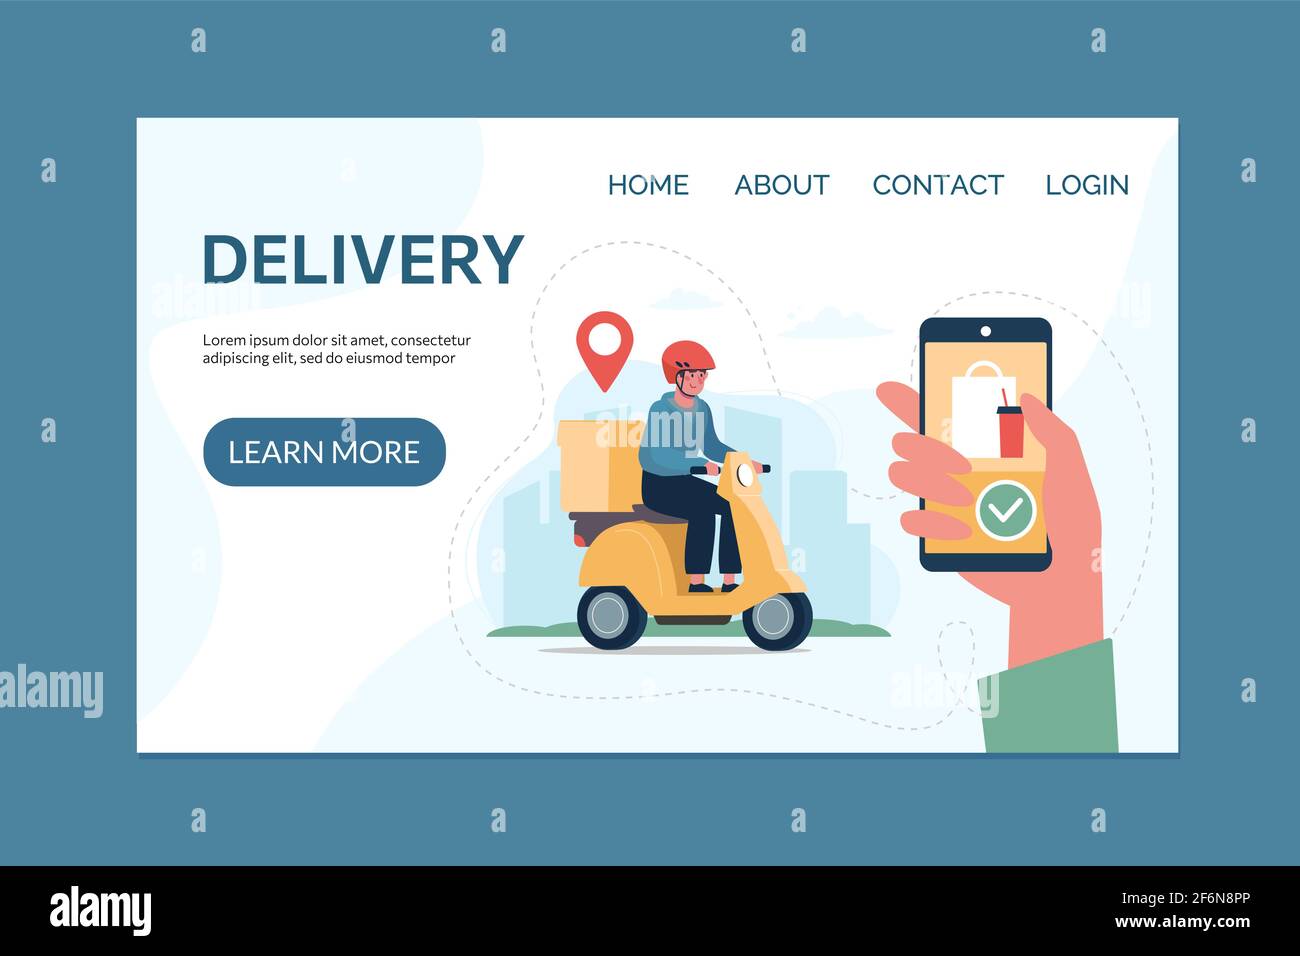 Today Delivery Inc.: Home Page